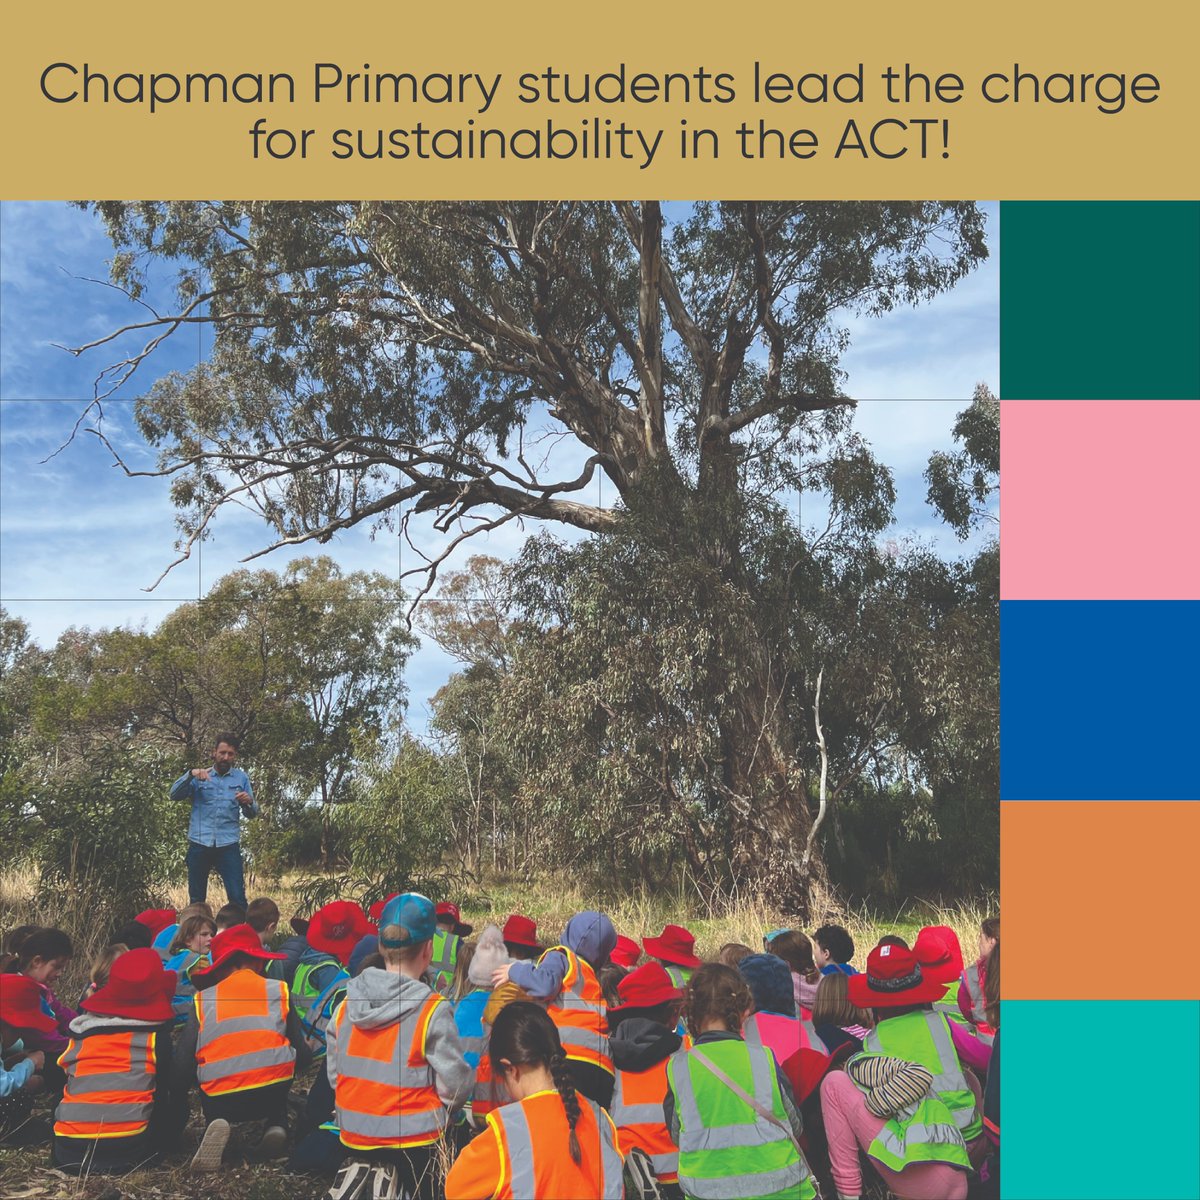 At Chapman Primary, sustainability isn't just a subject, it's a way of life! Check out how these young Canberrans are taking action to protect our environment storymaps.arcgis.com/stories/a54f37…